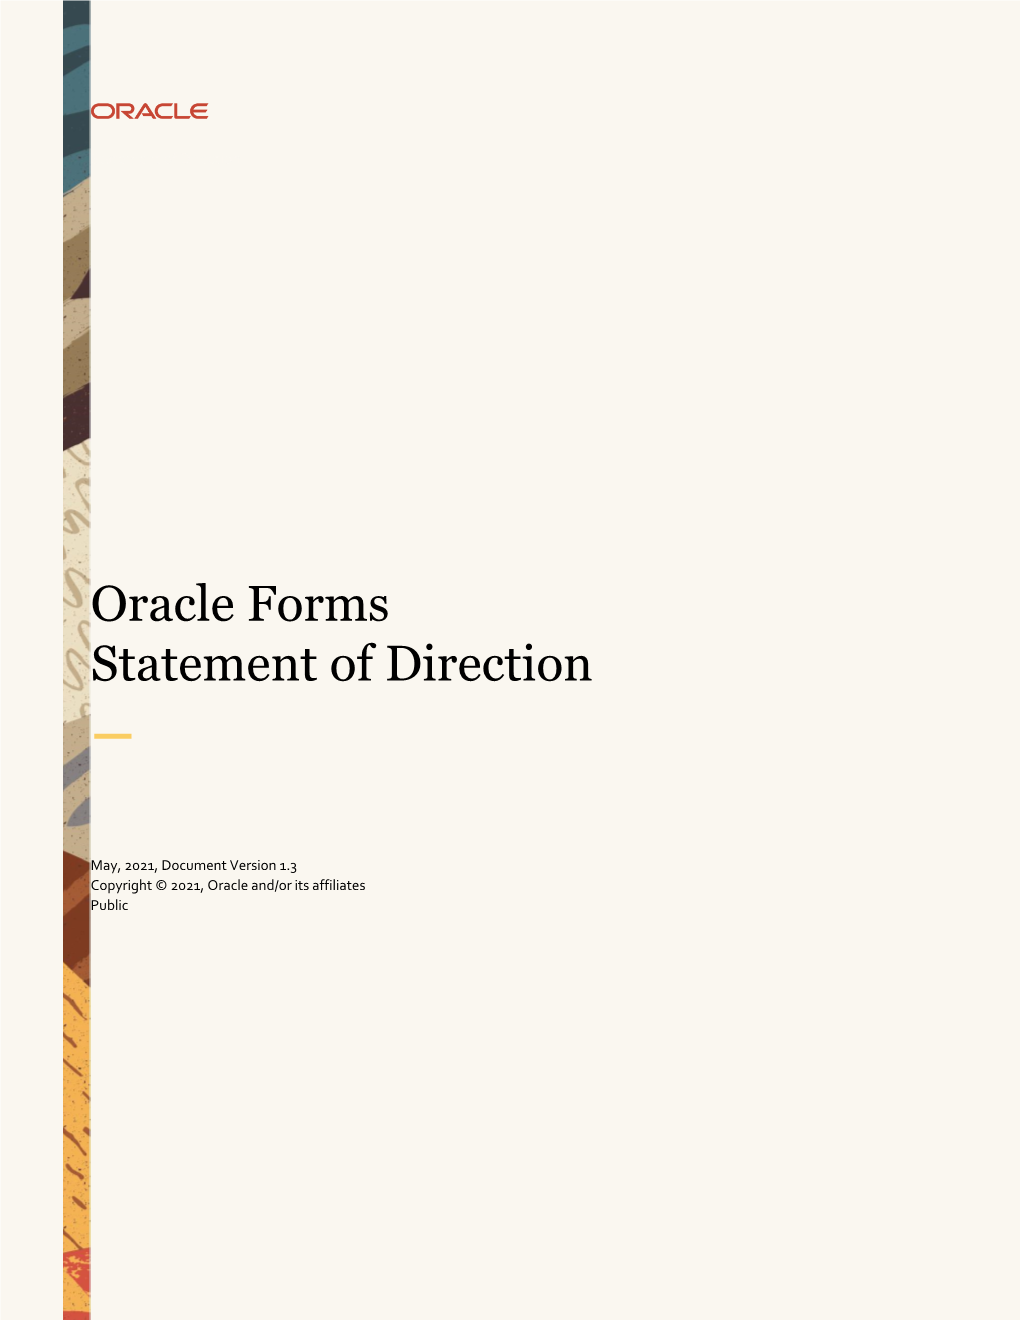 Oracle Forms Statement of Direction